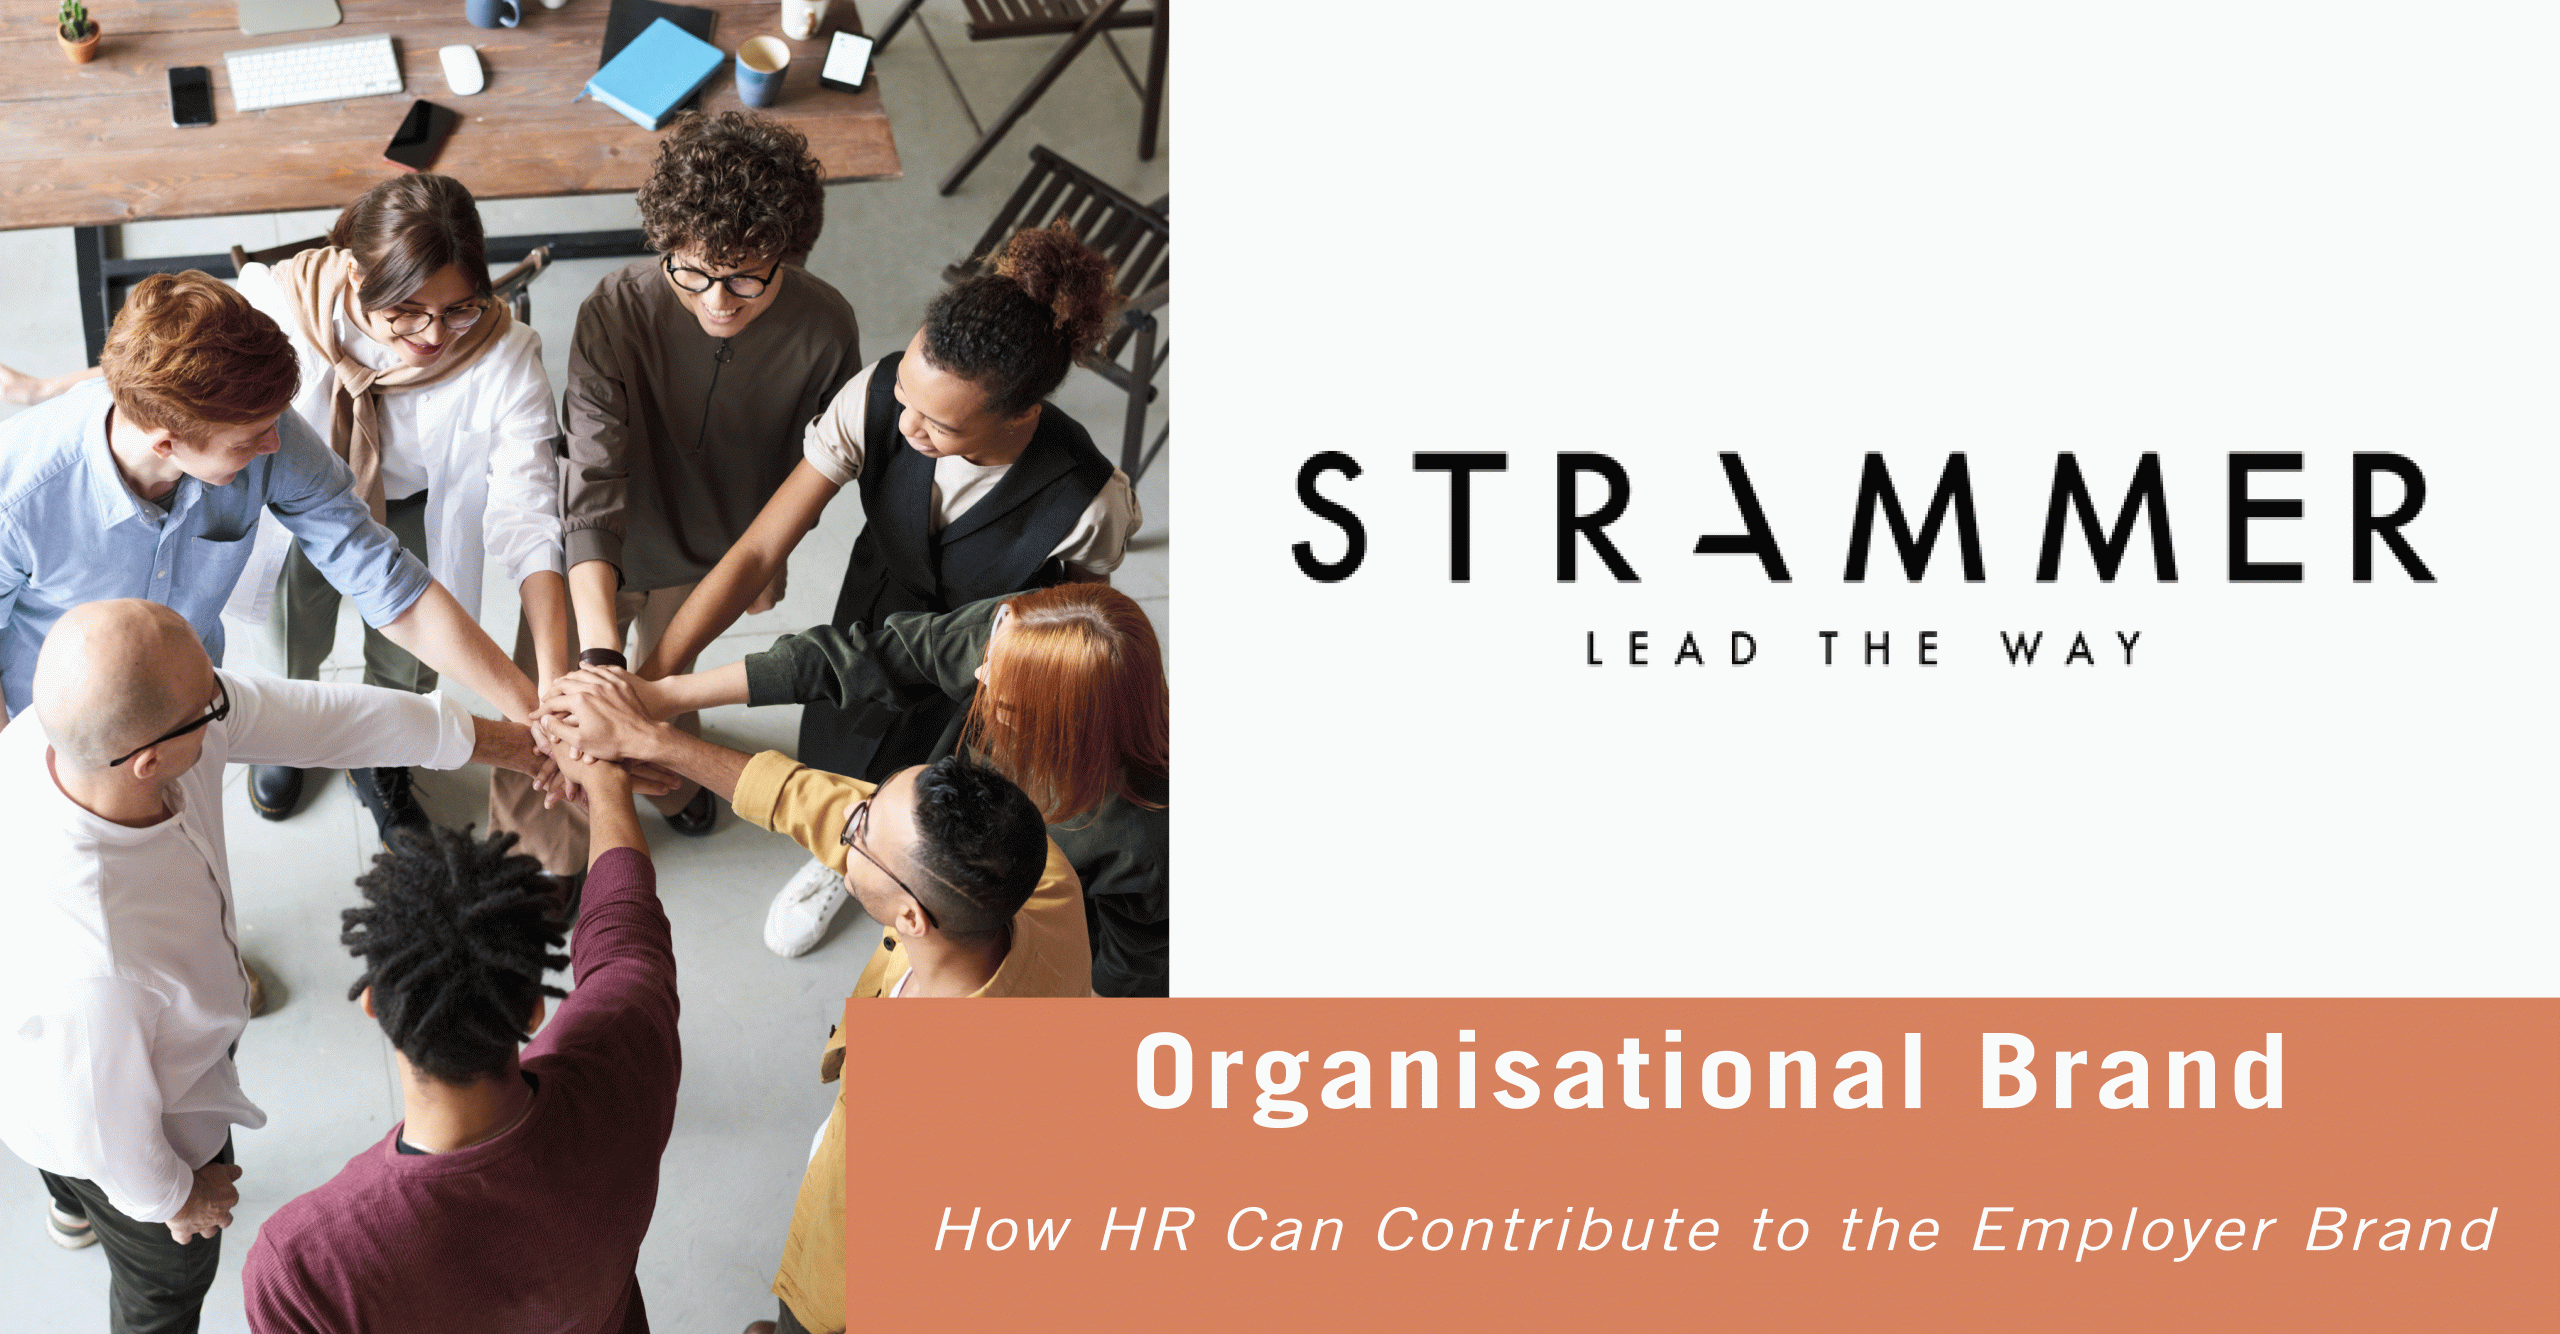 How HR Can Contribute to Organisational Brand